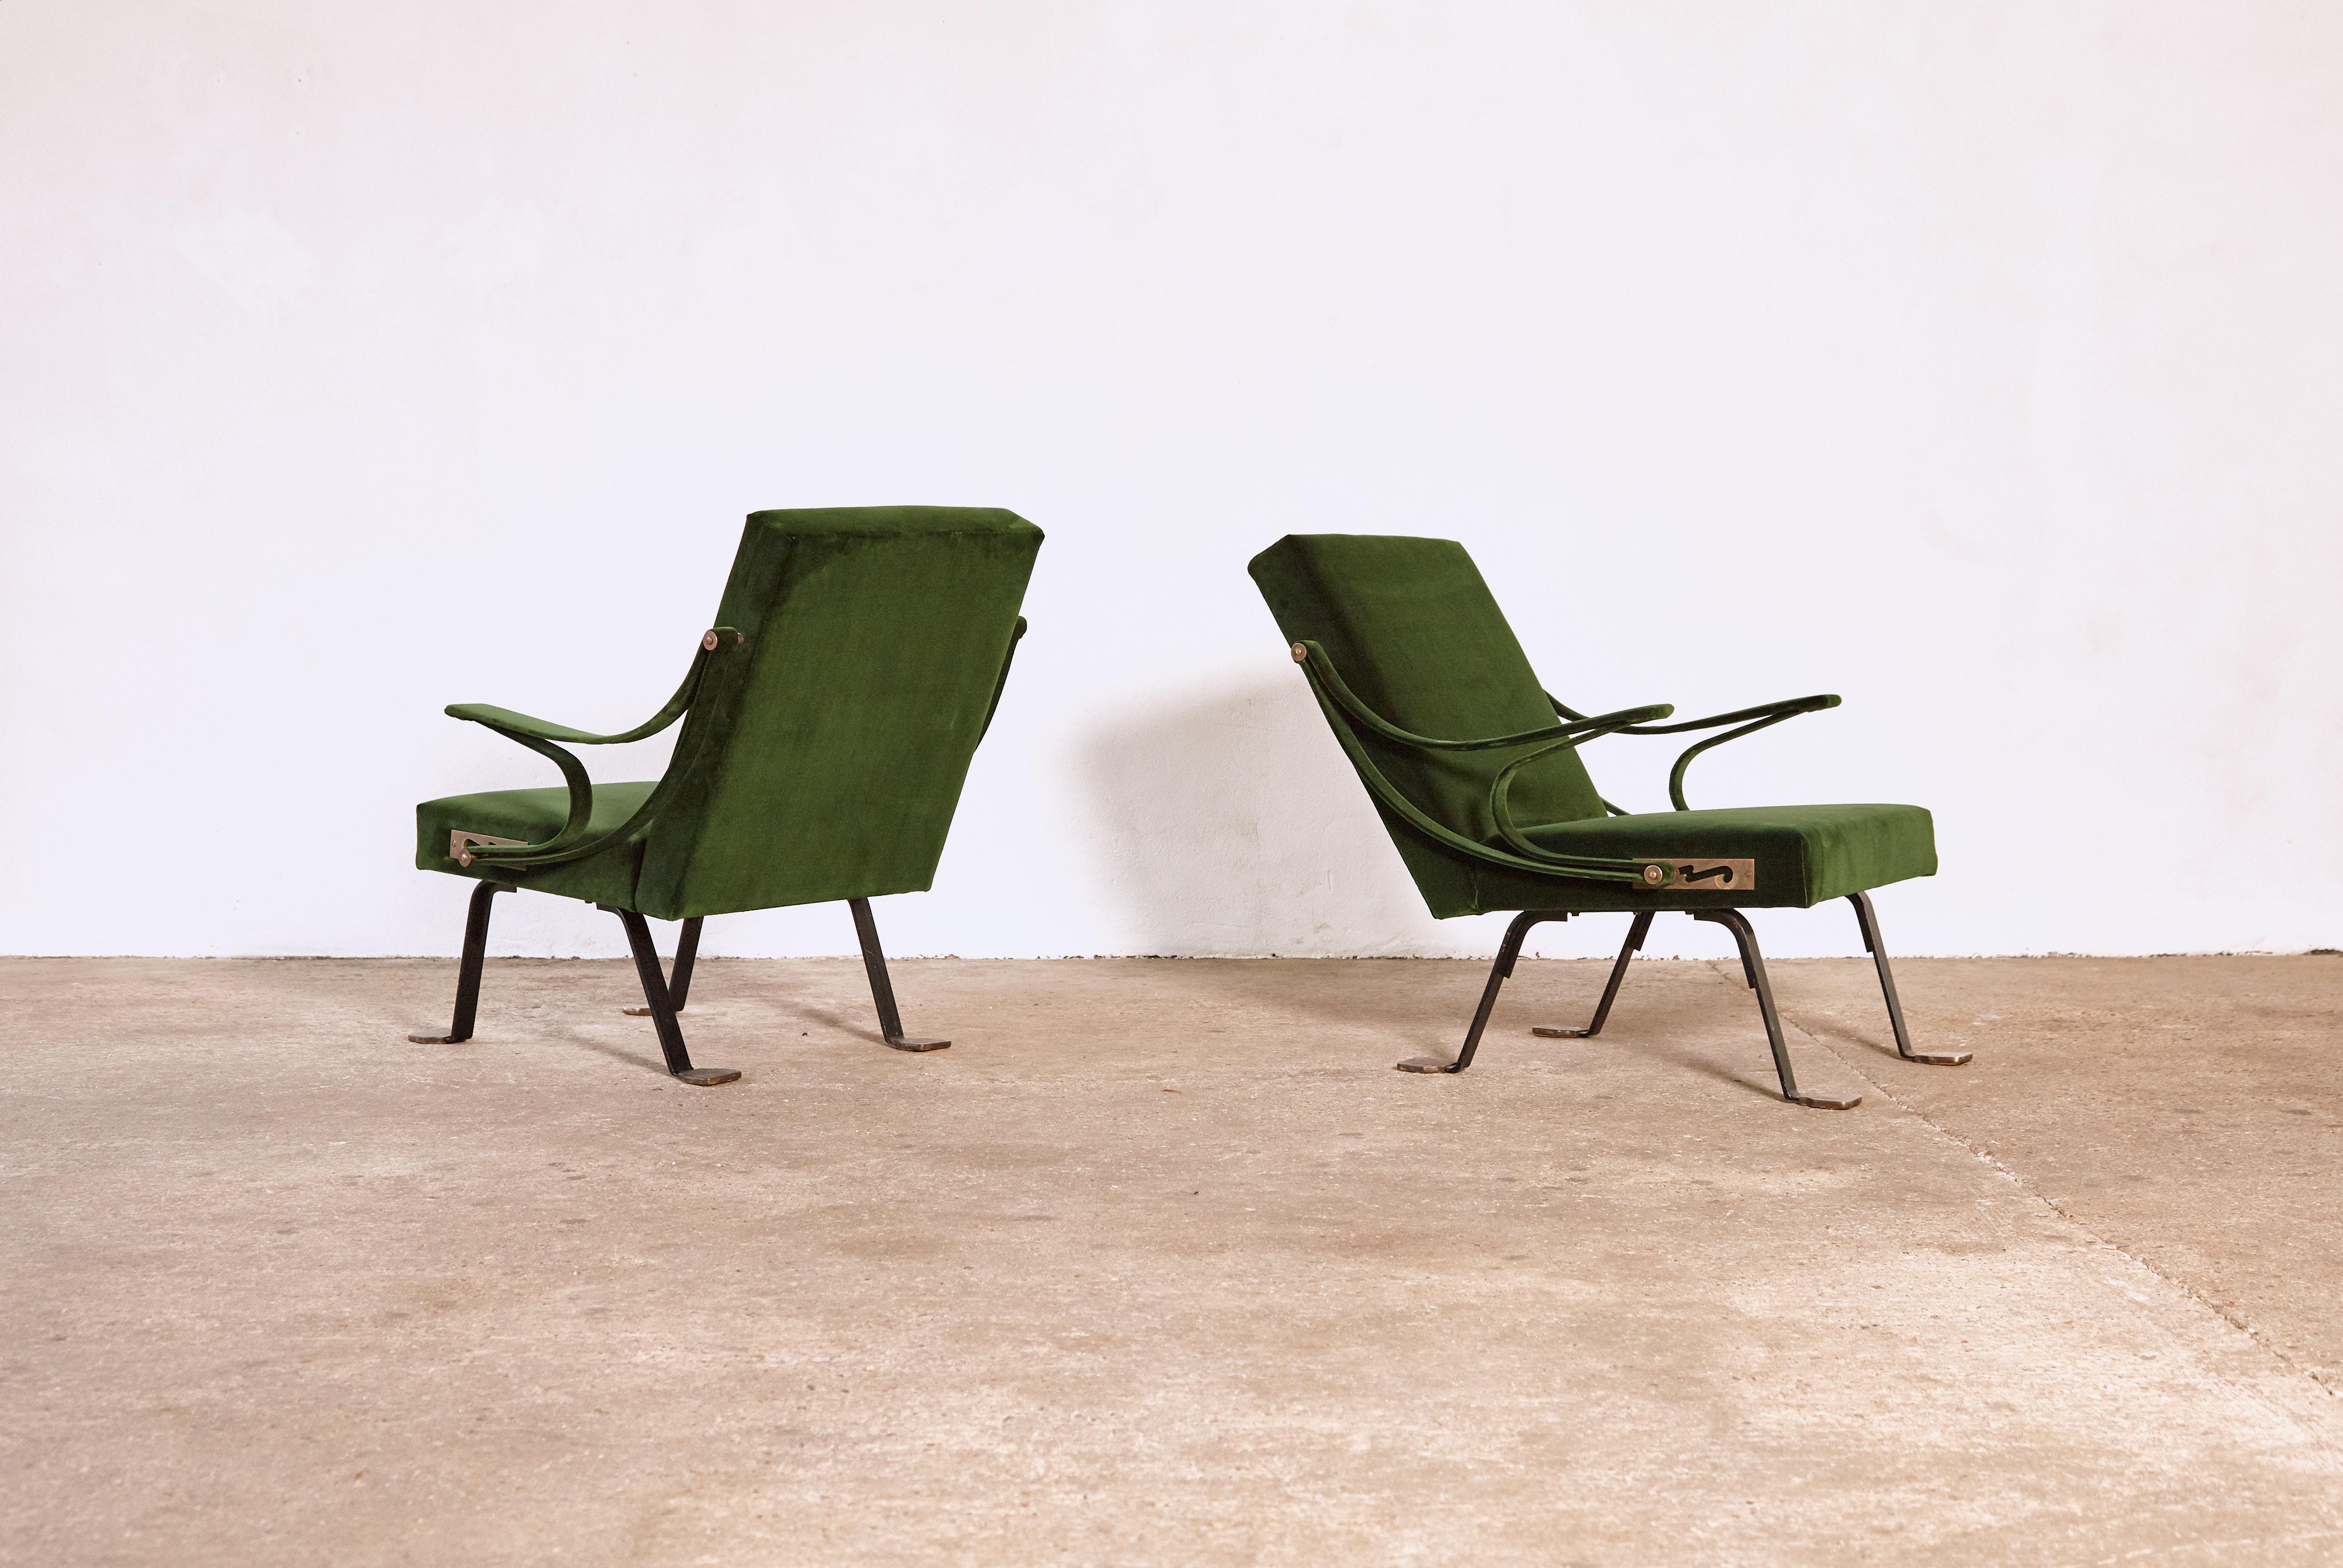 Steel Rare Pair of 1st Edition Ignazio Gardella Reclining Digamma Chairs, 1960s, Italy